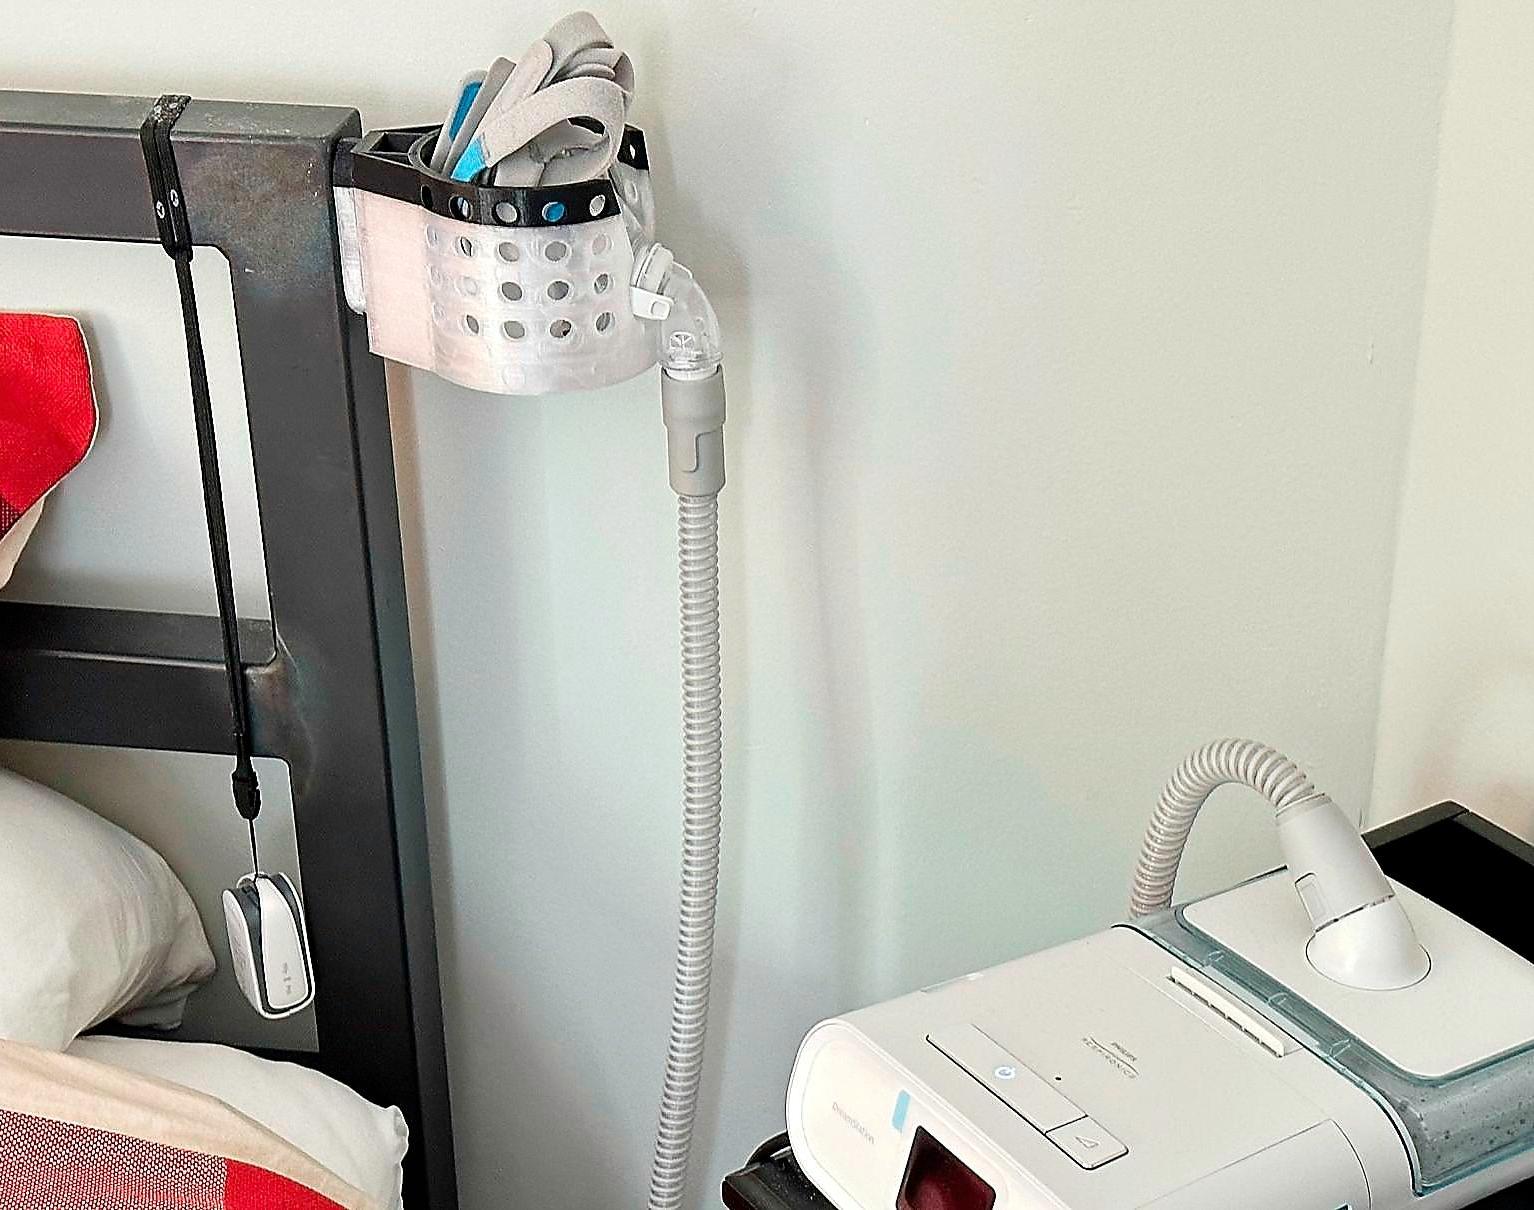 A Simple Magnetic Holder for a CPAP Mask.